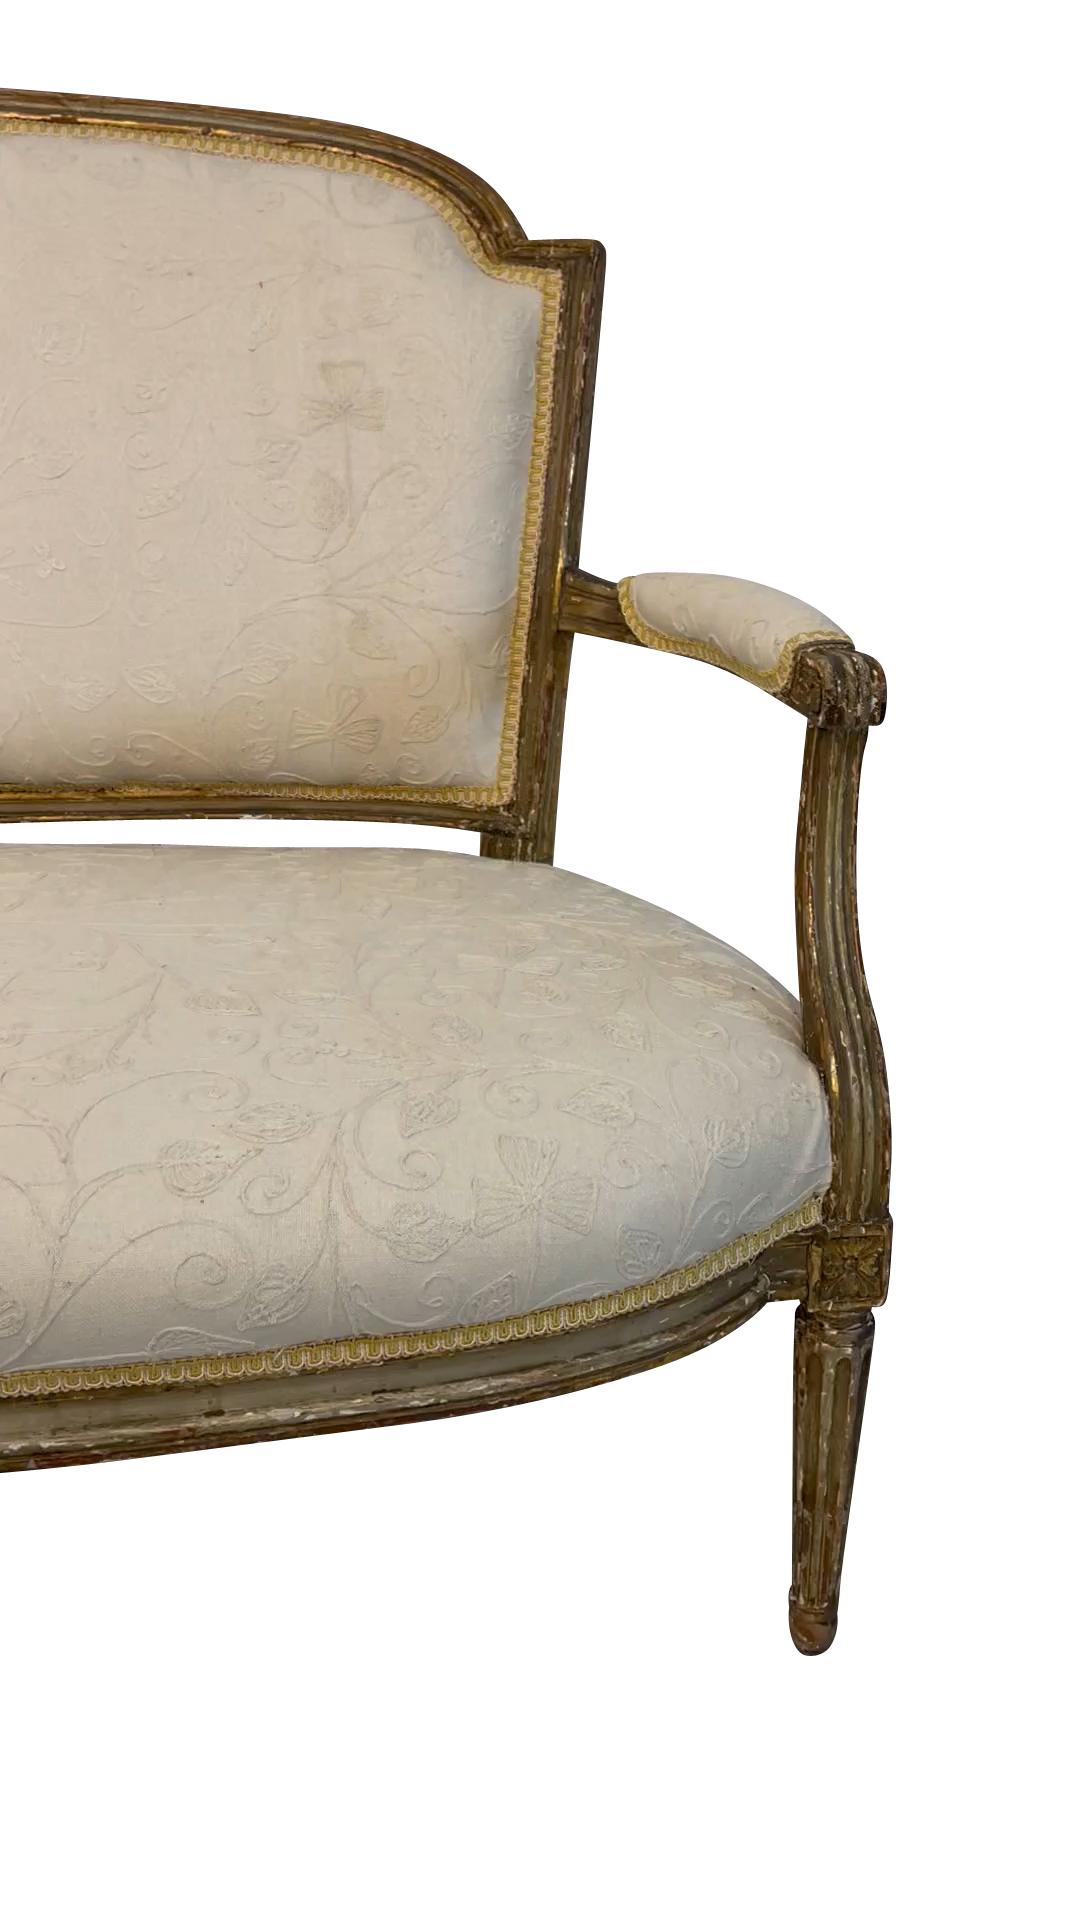 A classic 19th-century Louis XVI giltwood canape or settee upholstered in a cream-on-cream embroidered fabric. Original horsehair upholstery stuffing has been retained under the new fabric. 36 H X 54.5 W X 20 D 